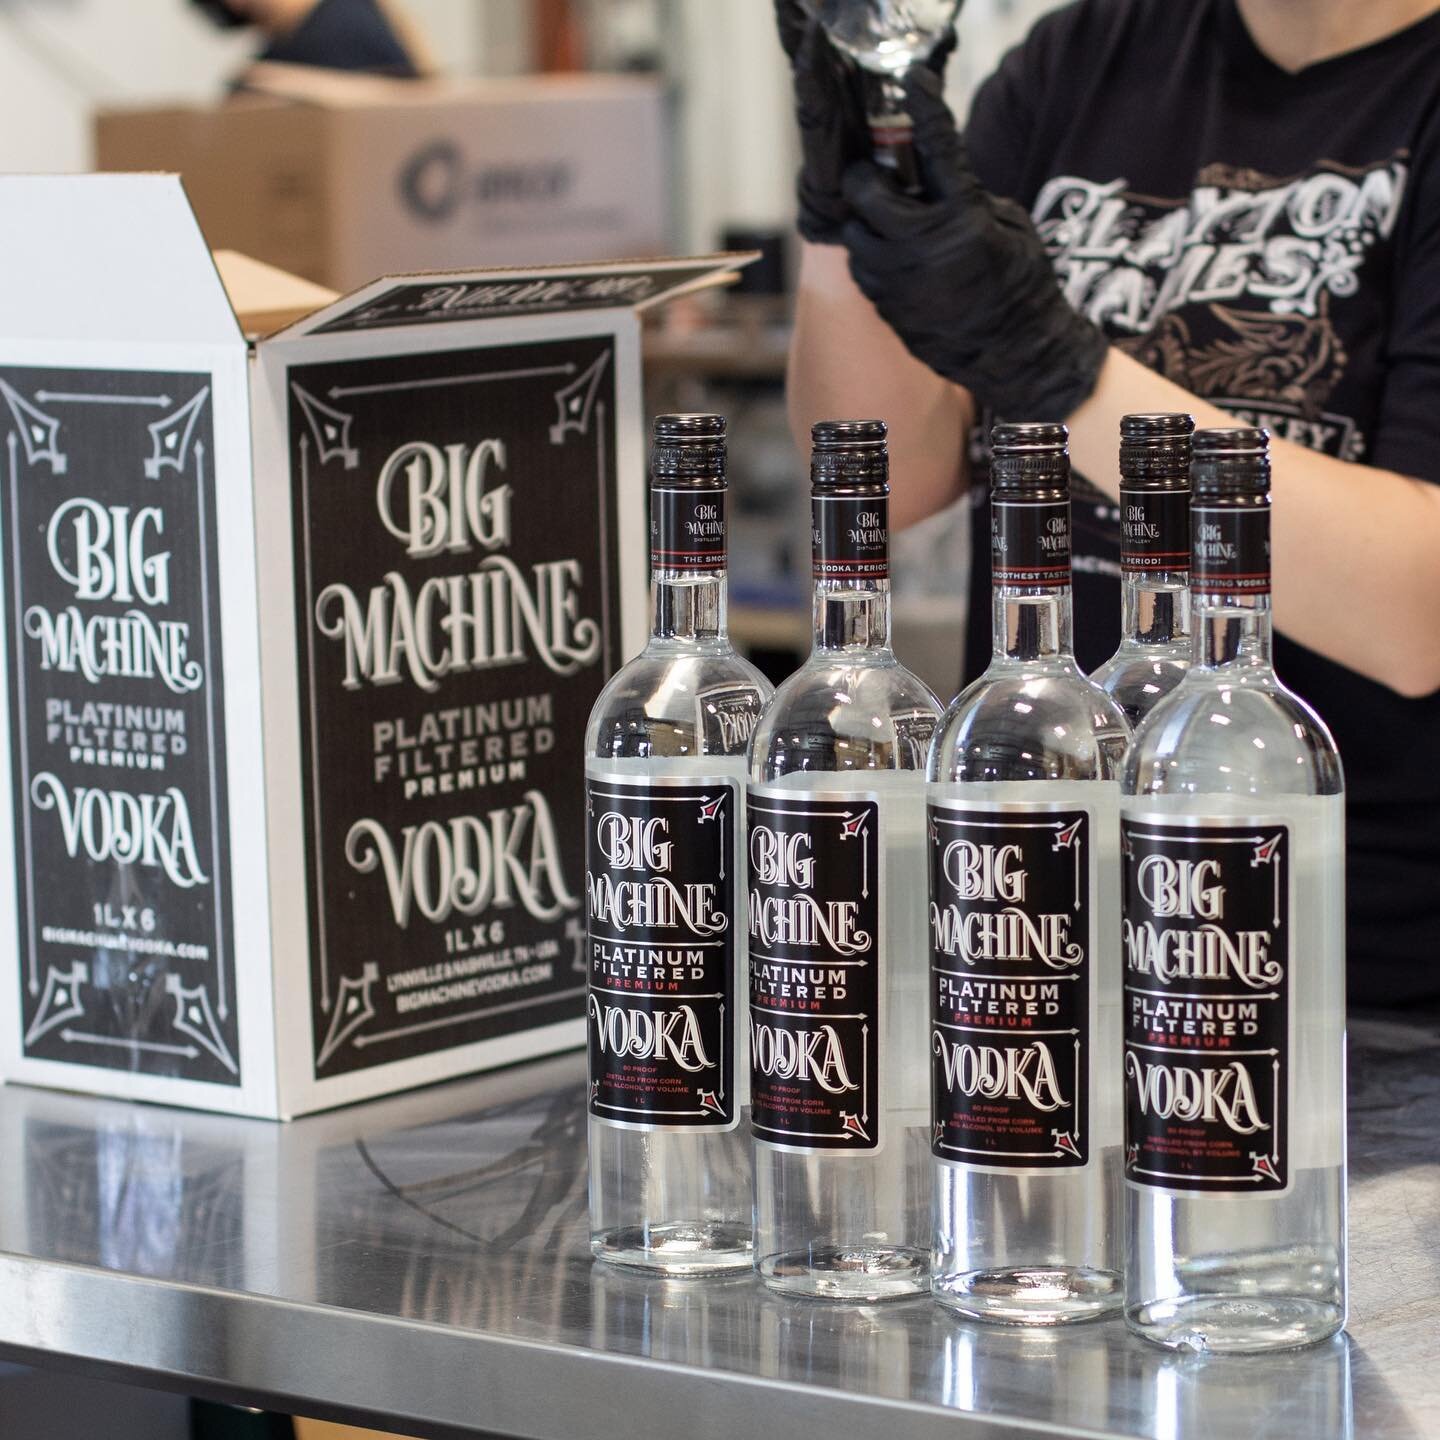 Our @bigmachinevodka bottles waiting to ship to a store near you&hellip;